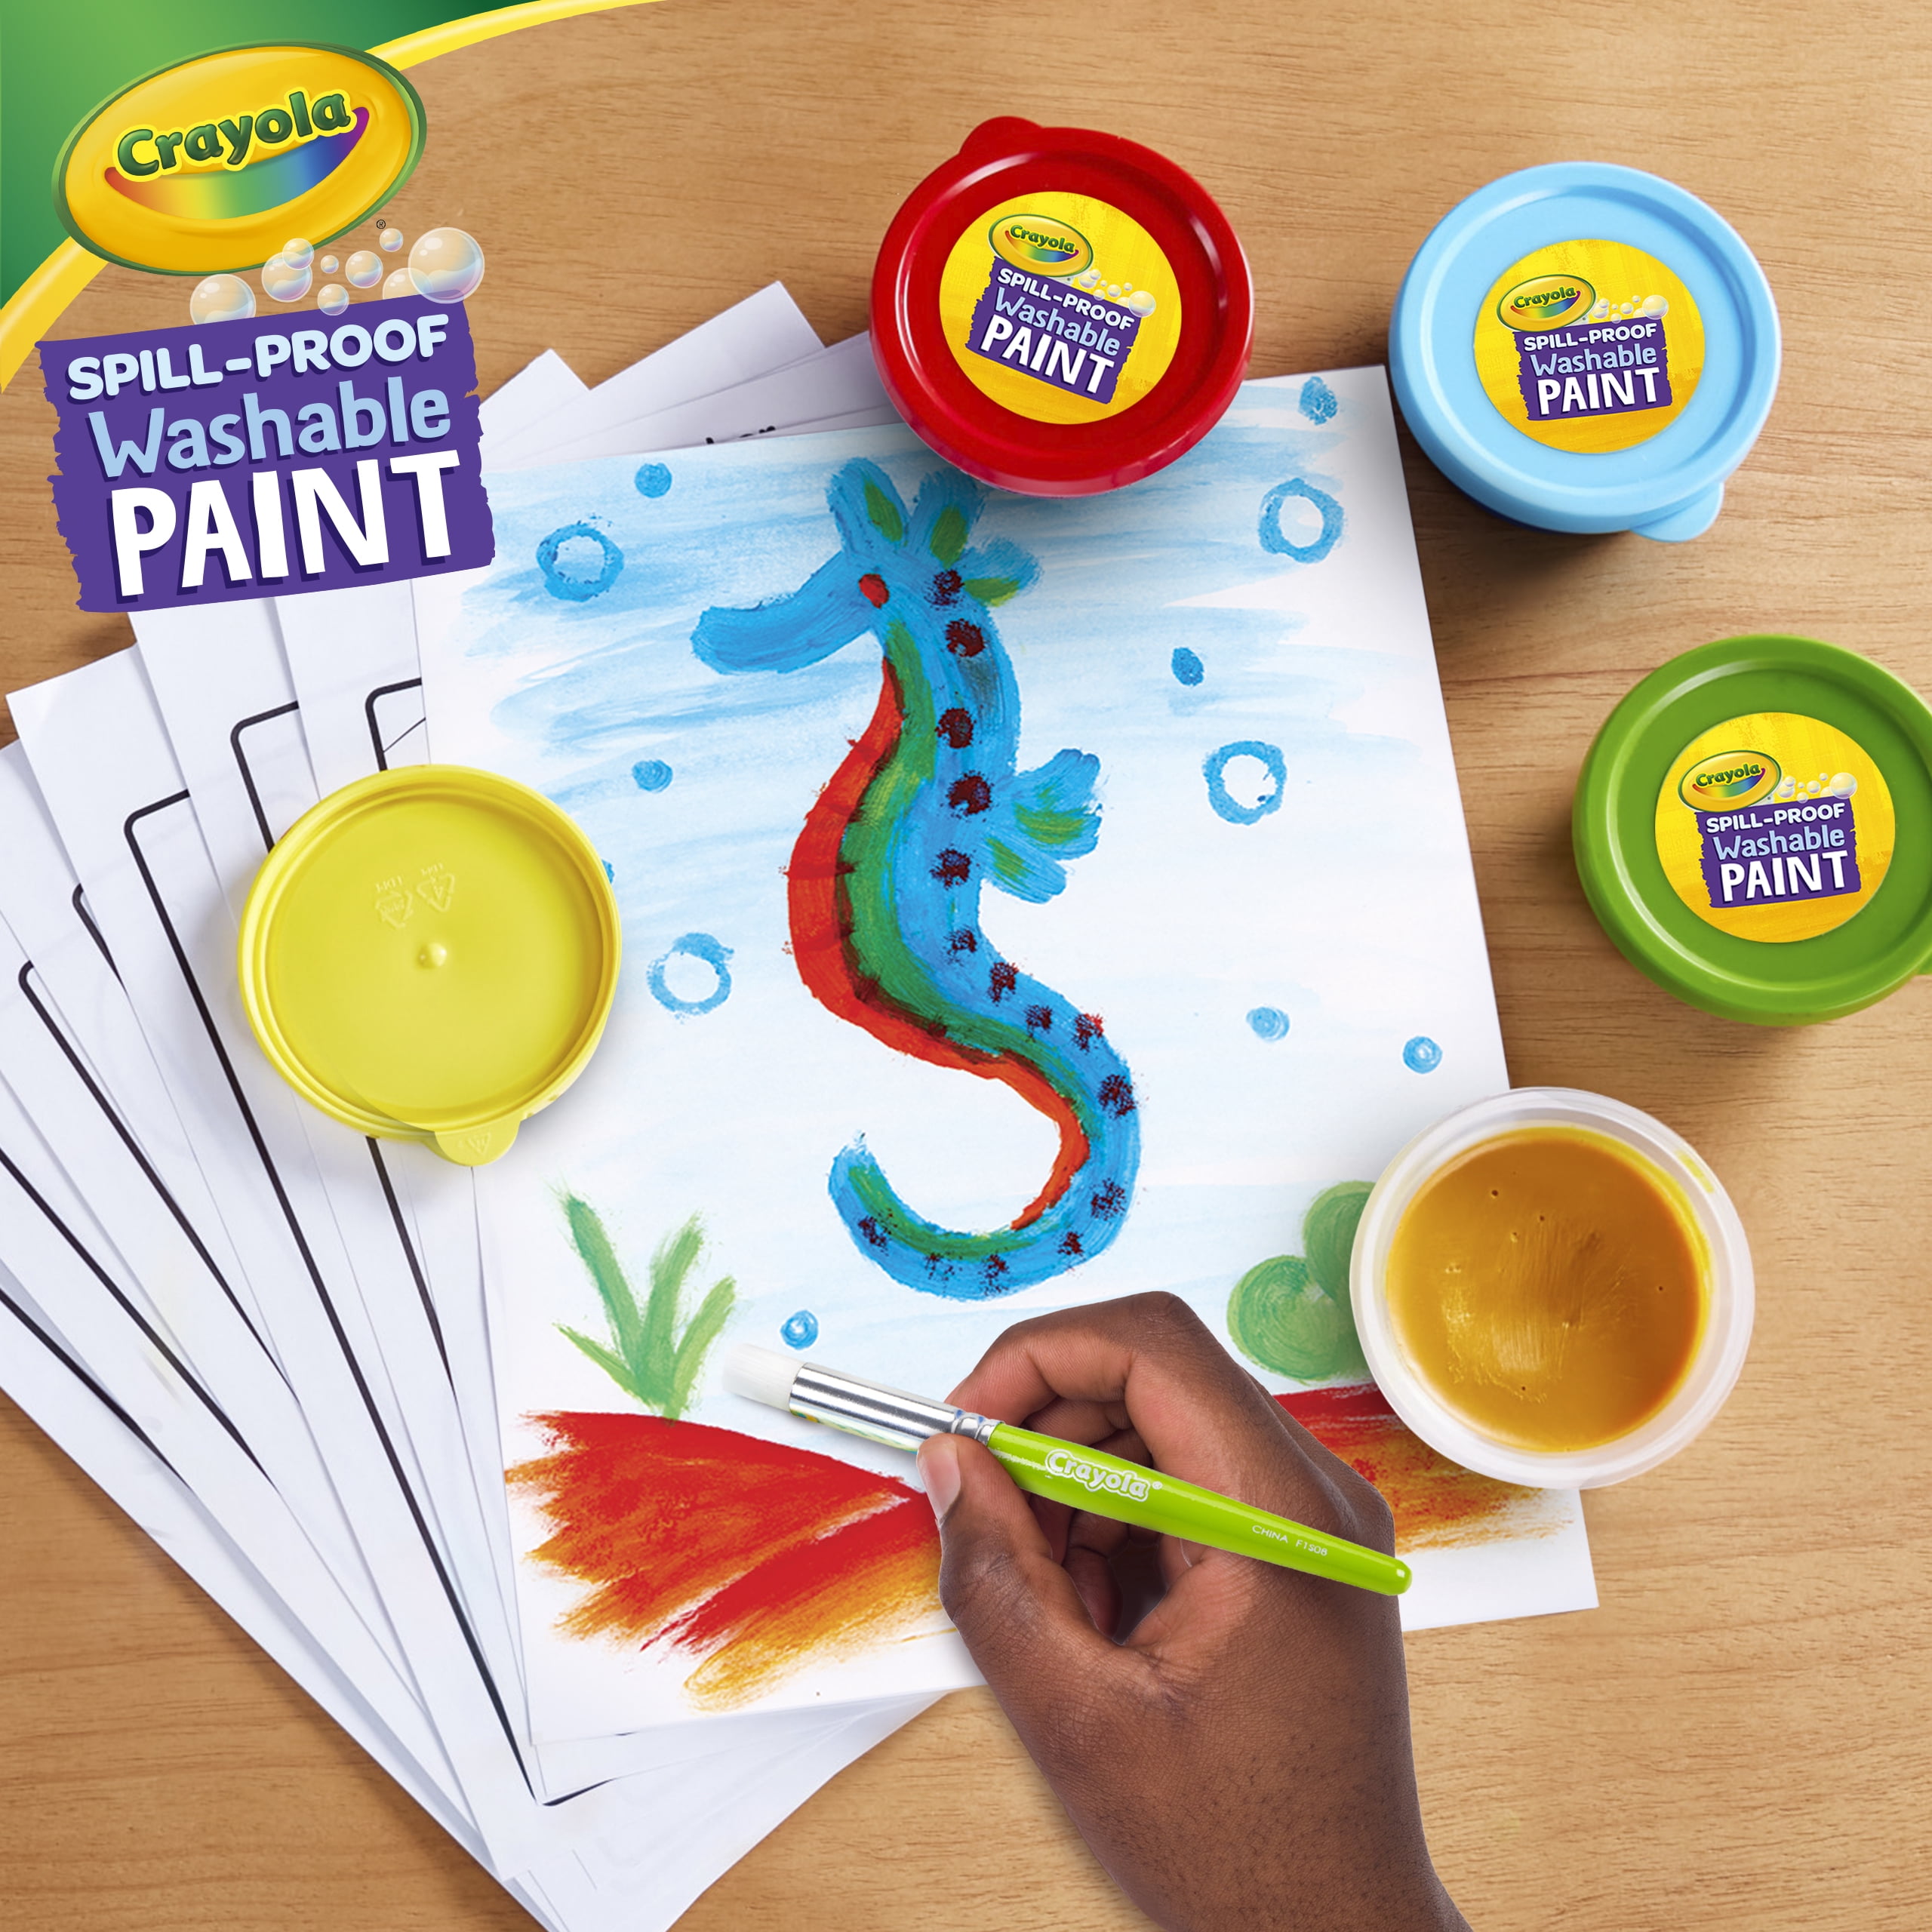 Crayola Spill Proof Paint Set - A2Z Science & Learning Toy Store